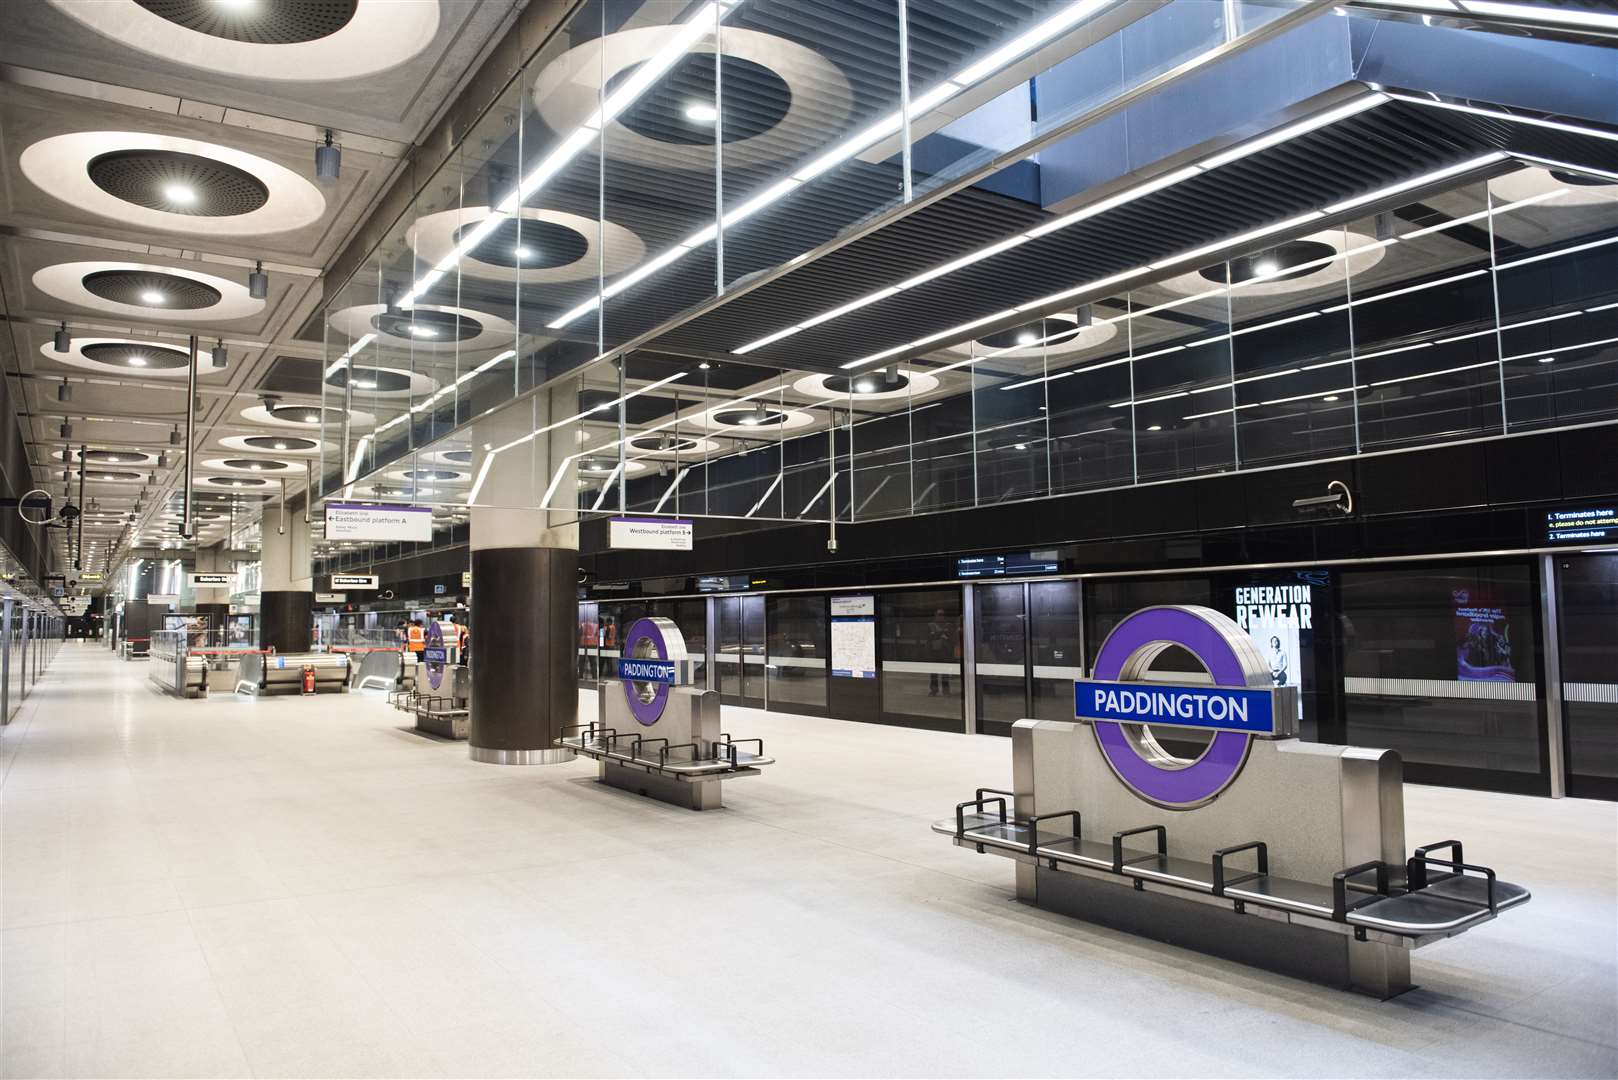 Paddington station is gearing up to welcome new Elizabeth line trains